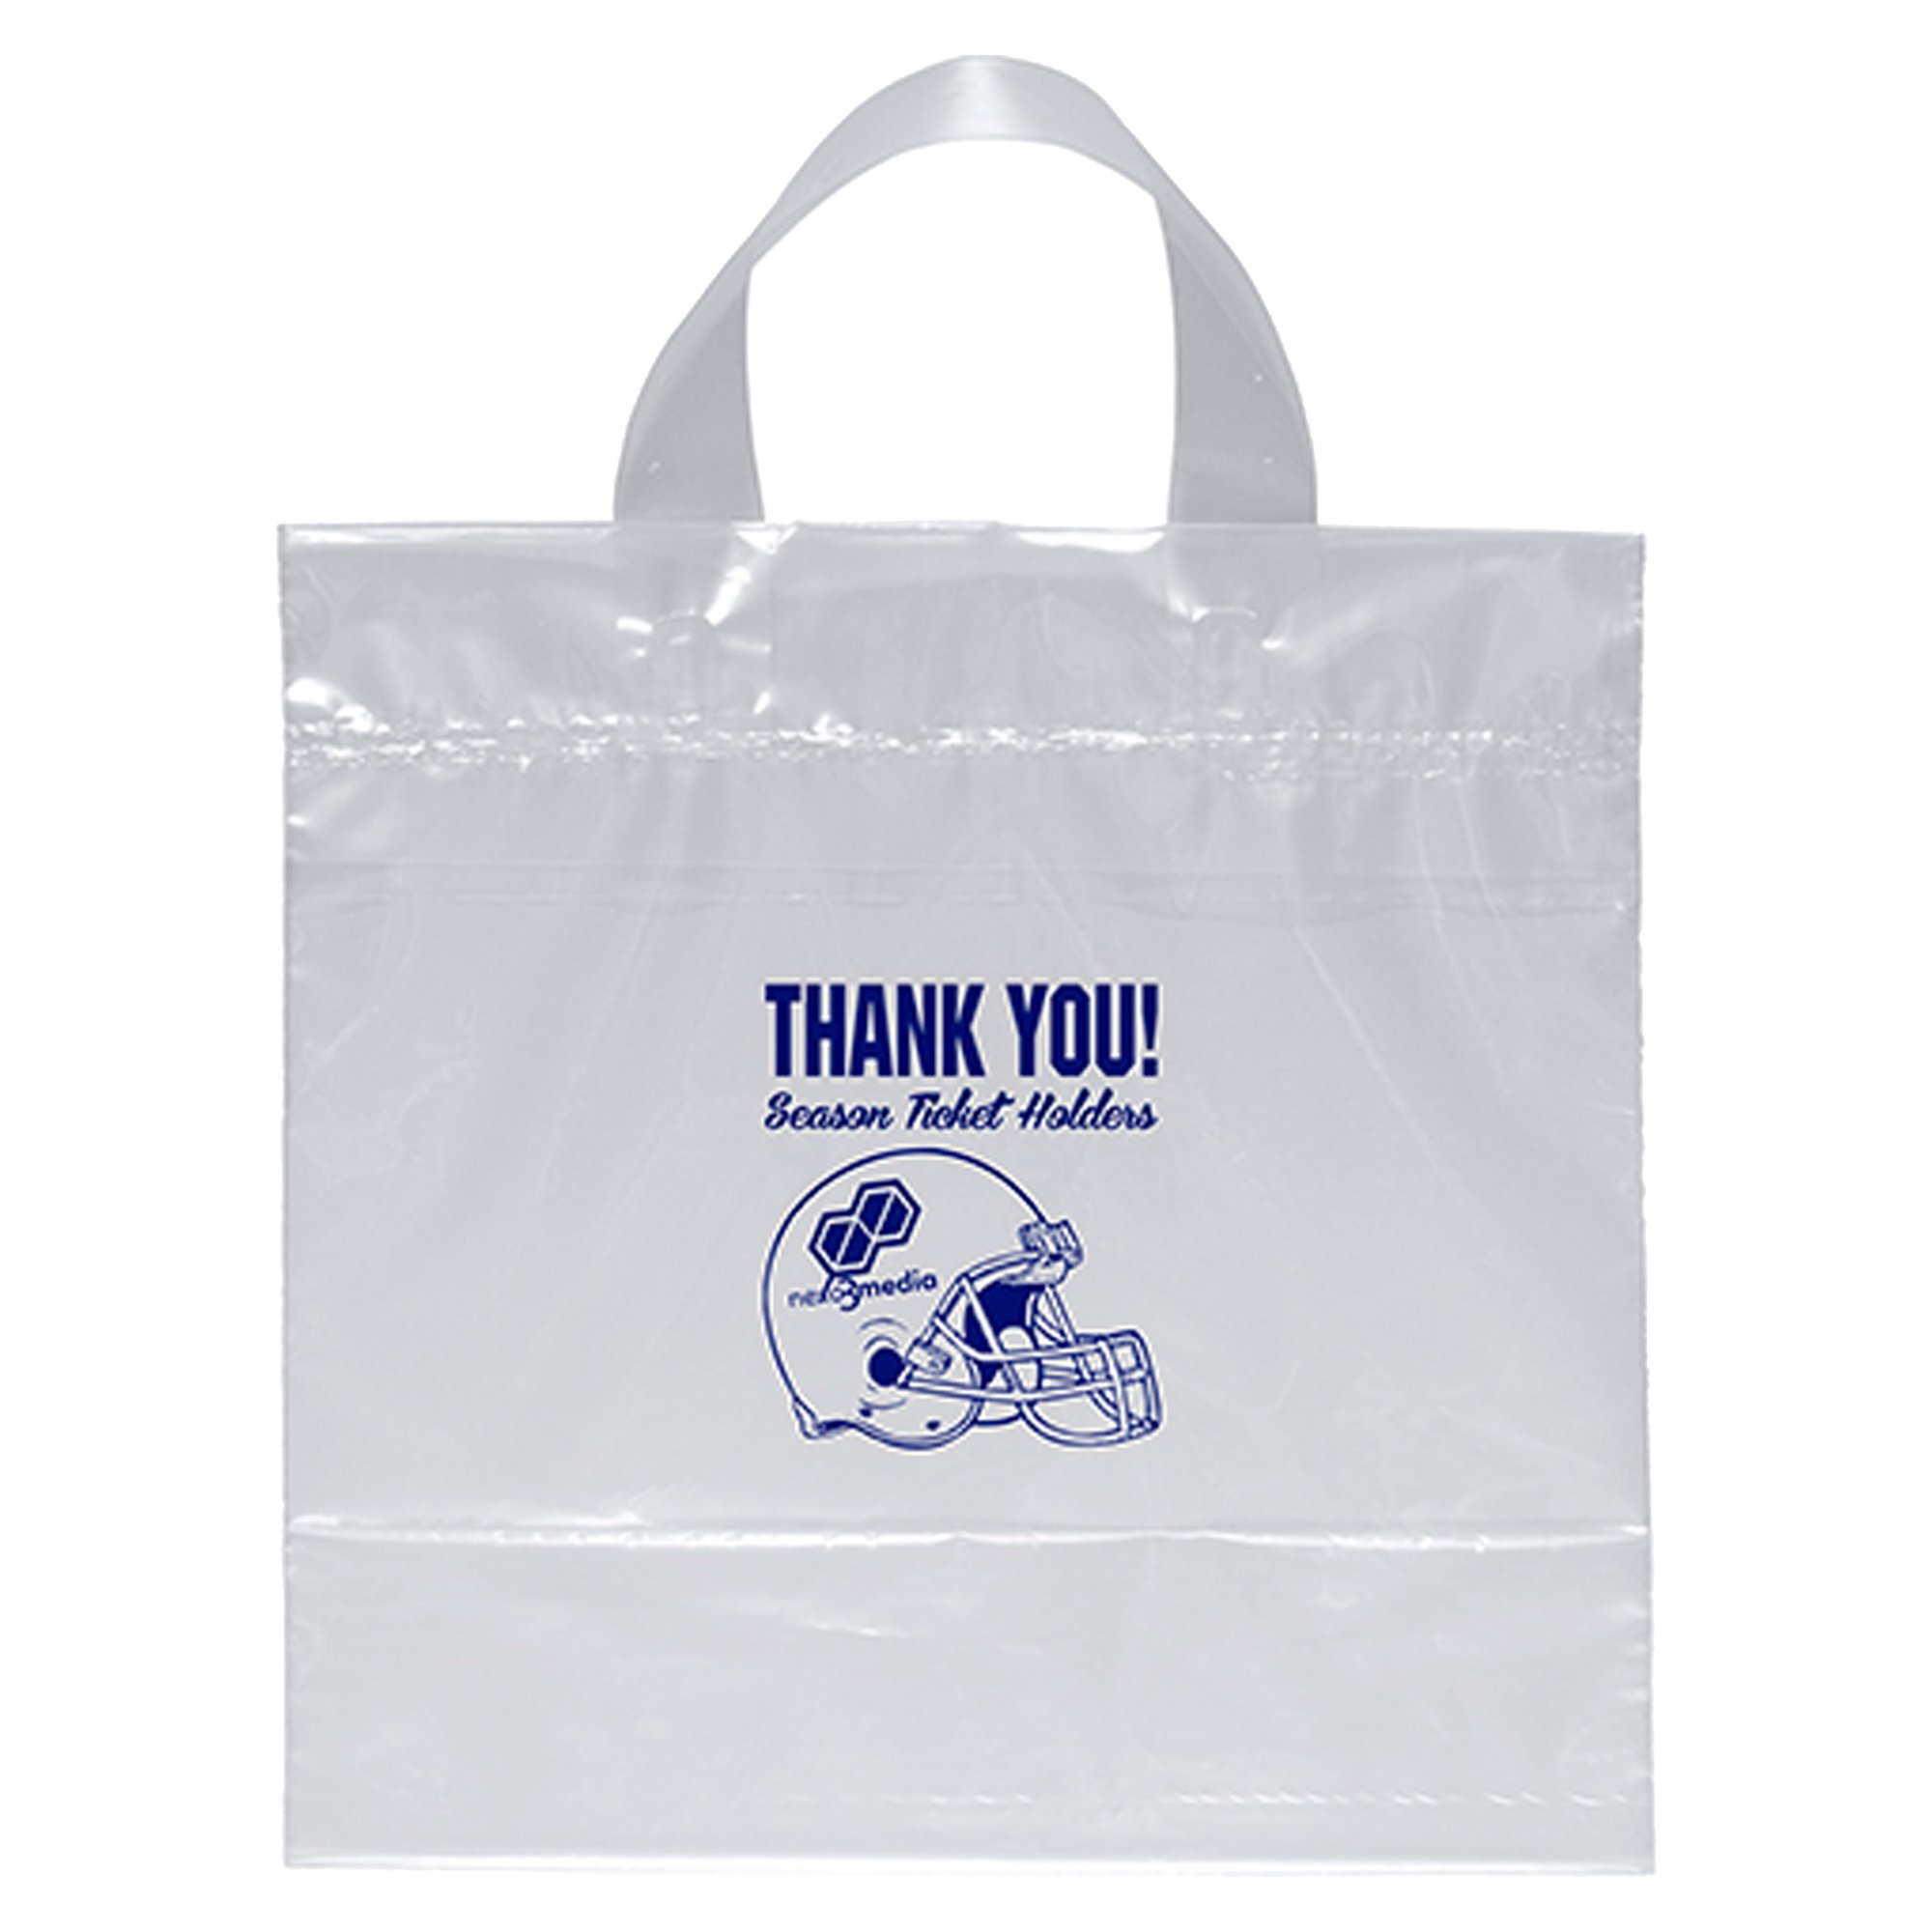 Custom Clear Plastic Tote Bags w/ Handles for NFL Games | National Pen